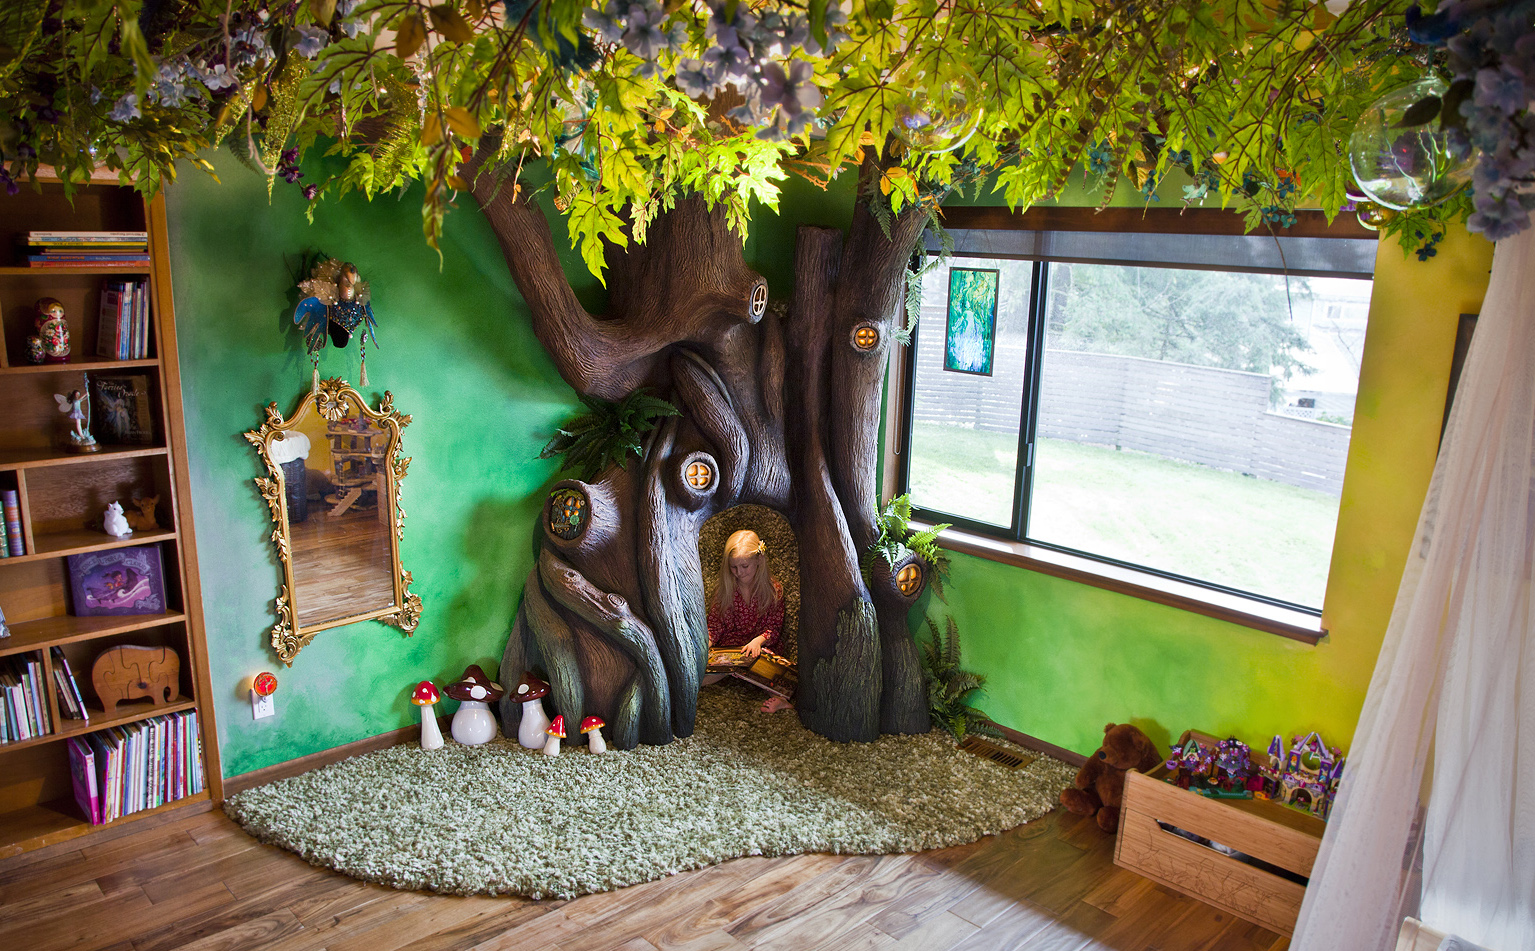 PHOTO: Dad Builds Magical Fairy Tale Tree in Daughter’s Bedroom